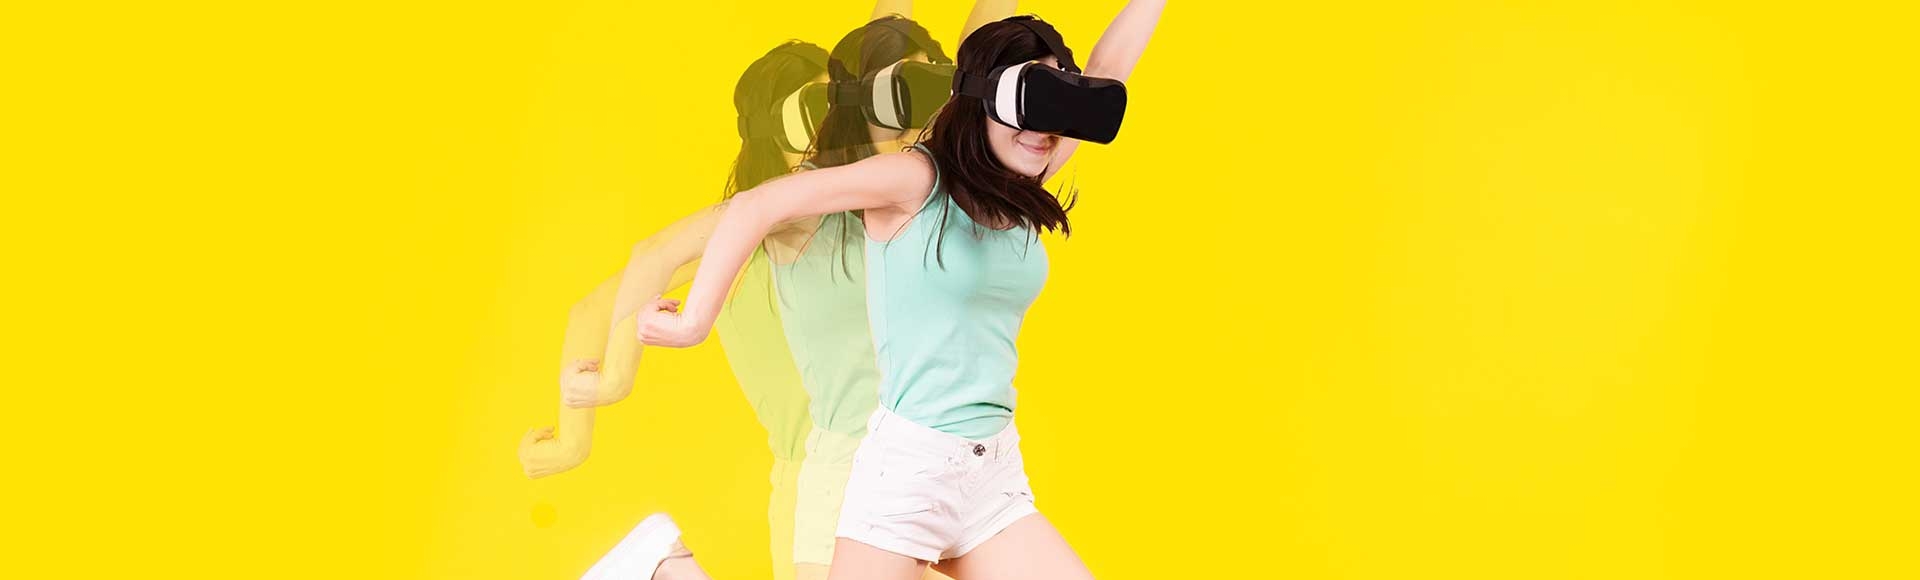 Virtual Reality Fitness: Improving Physical & Mental Health